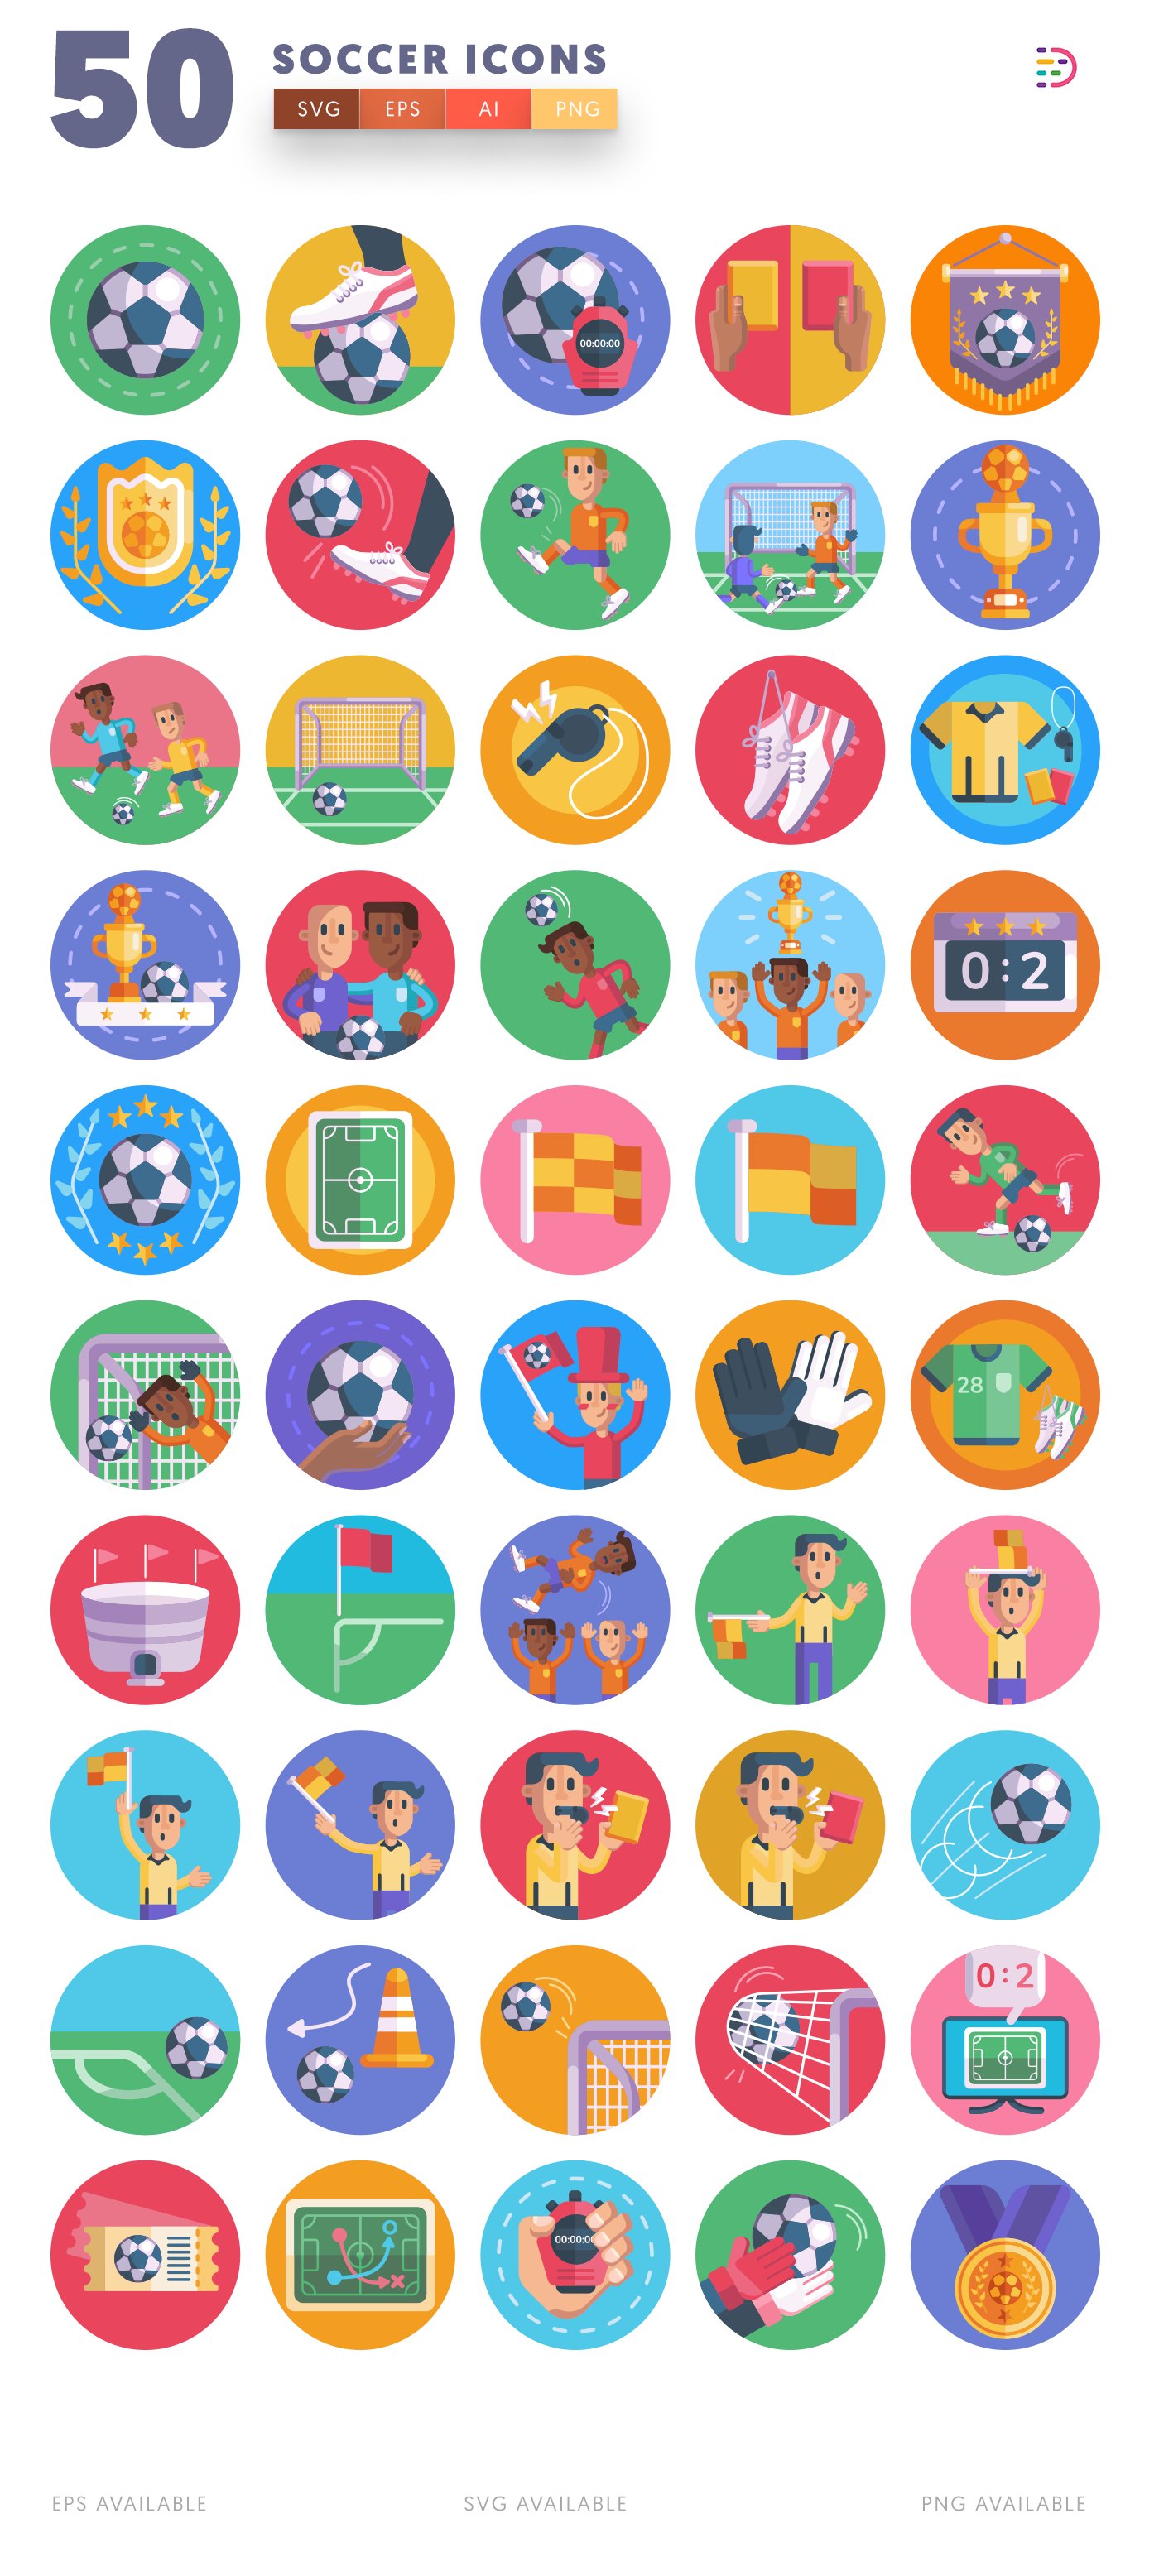 soccer icons 2 945